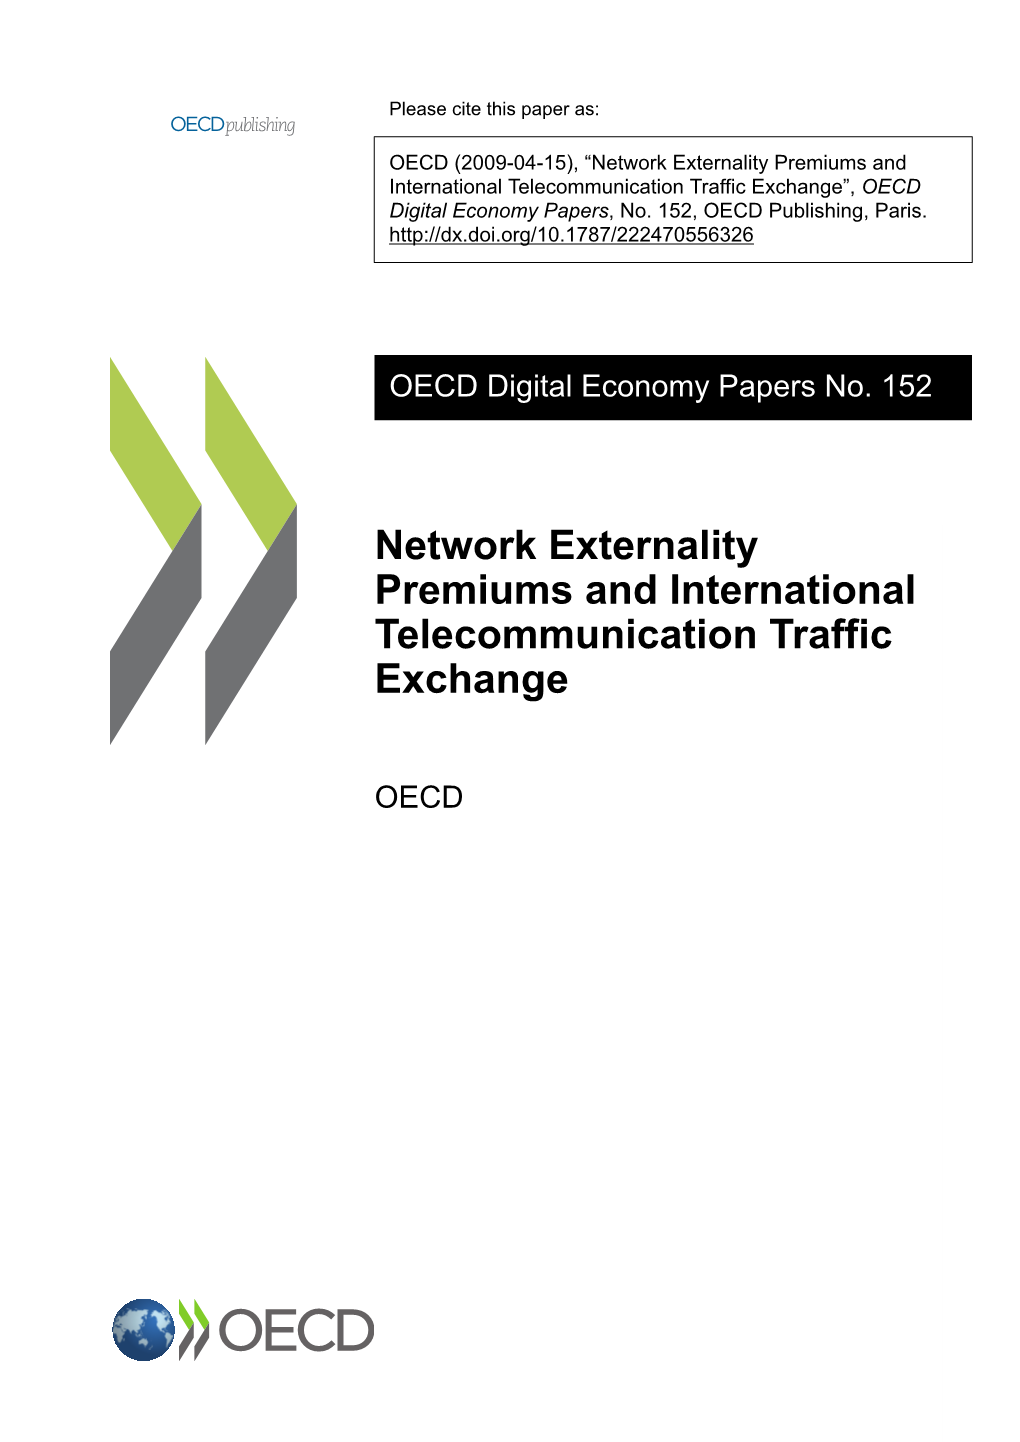 Network Externality Premiums and International Telecommunication Traffic Exchange”, OECD Digital Economy Papers, No